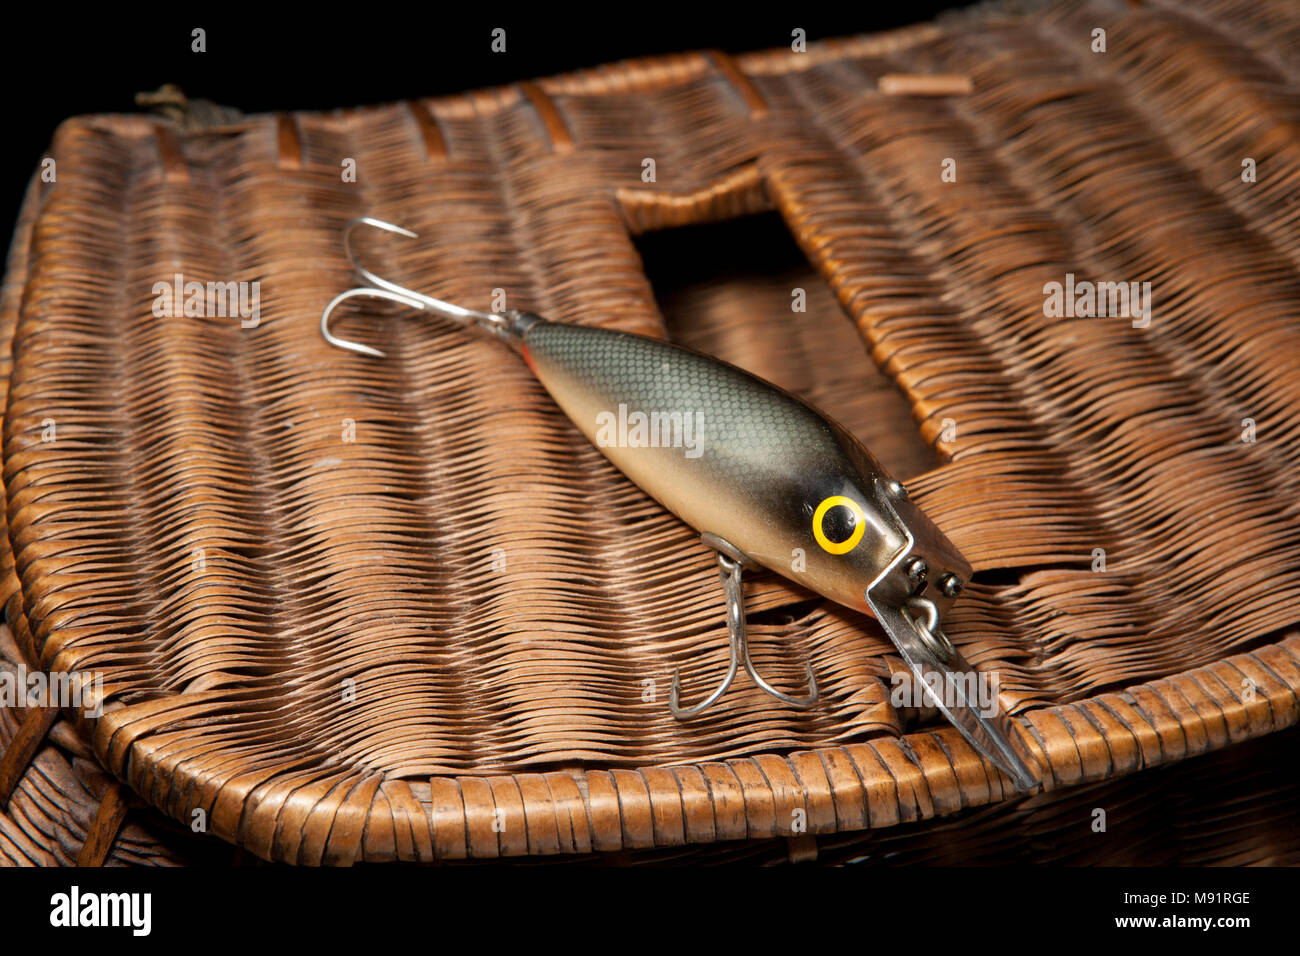 https://c8.alamy.com/comp/M91RGE/old-fishing-lure-or-plug-possibly-by-woods-mfg-on-a-creel-and-black-background-from-a-vintage-fishing-tackle-collection-in-the-uk-M91RGE.jpg